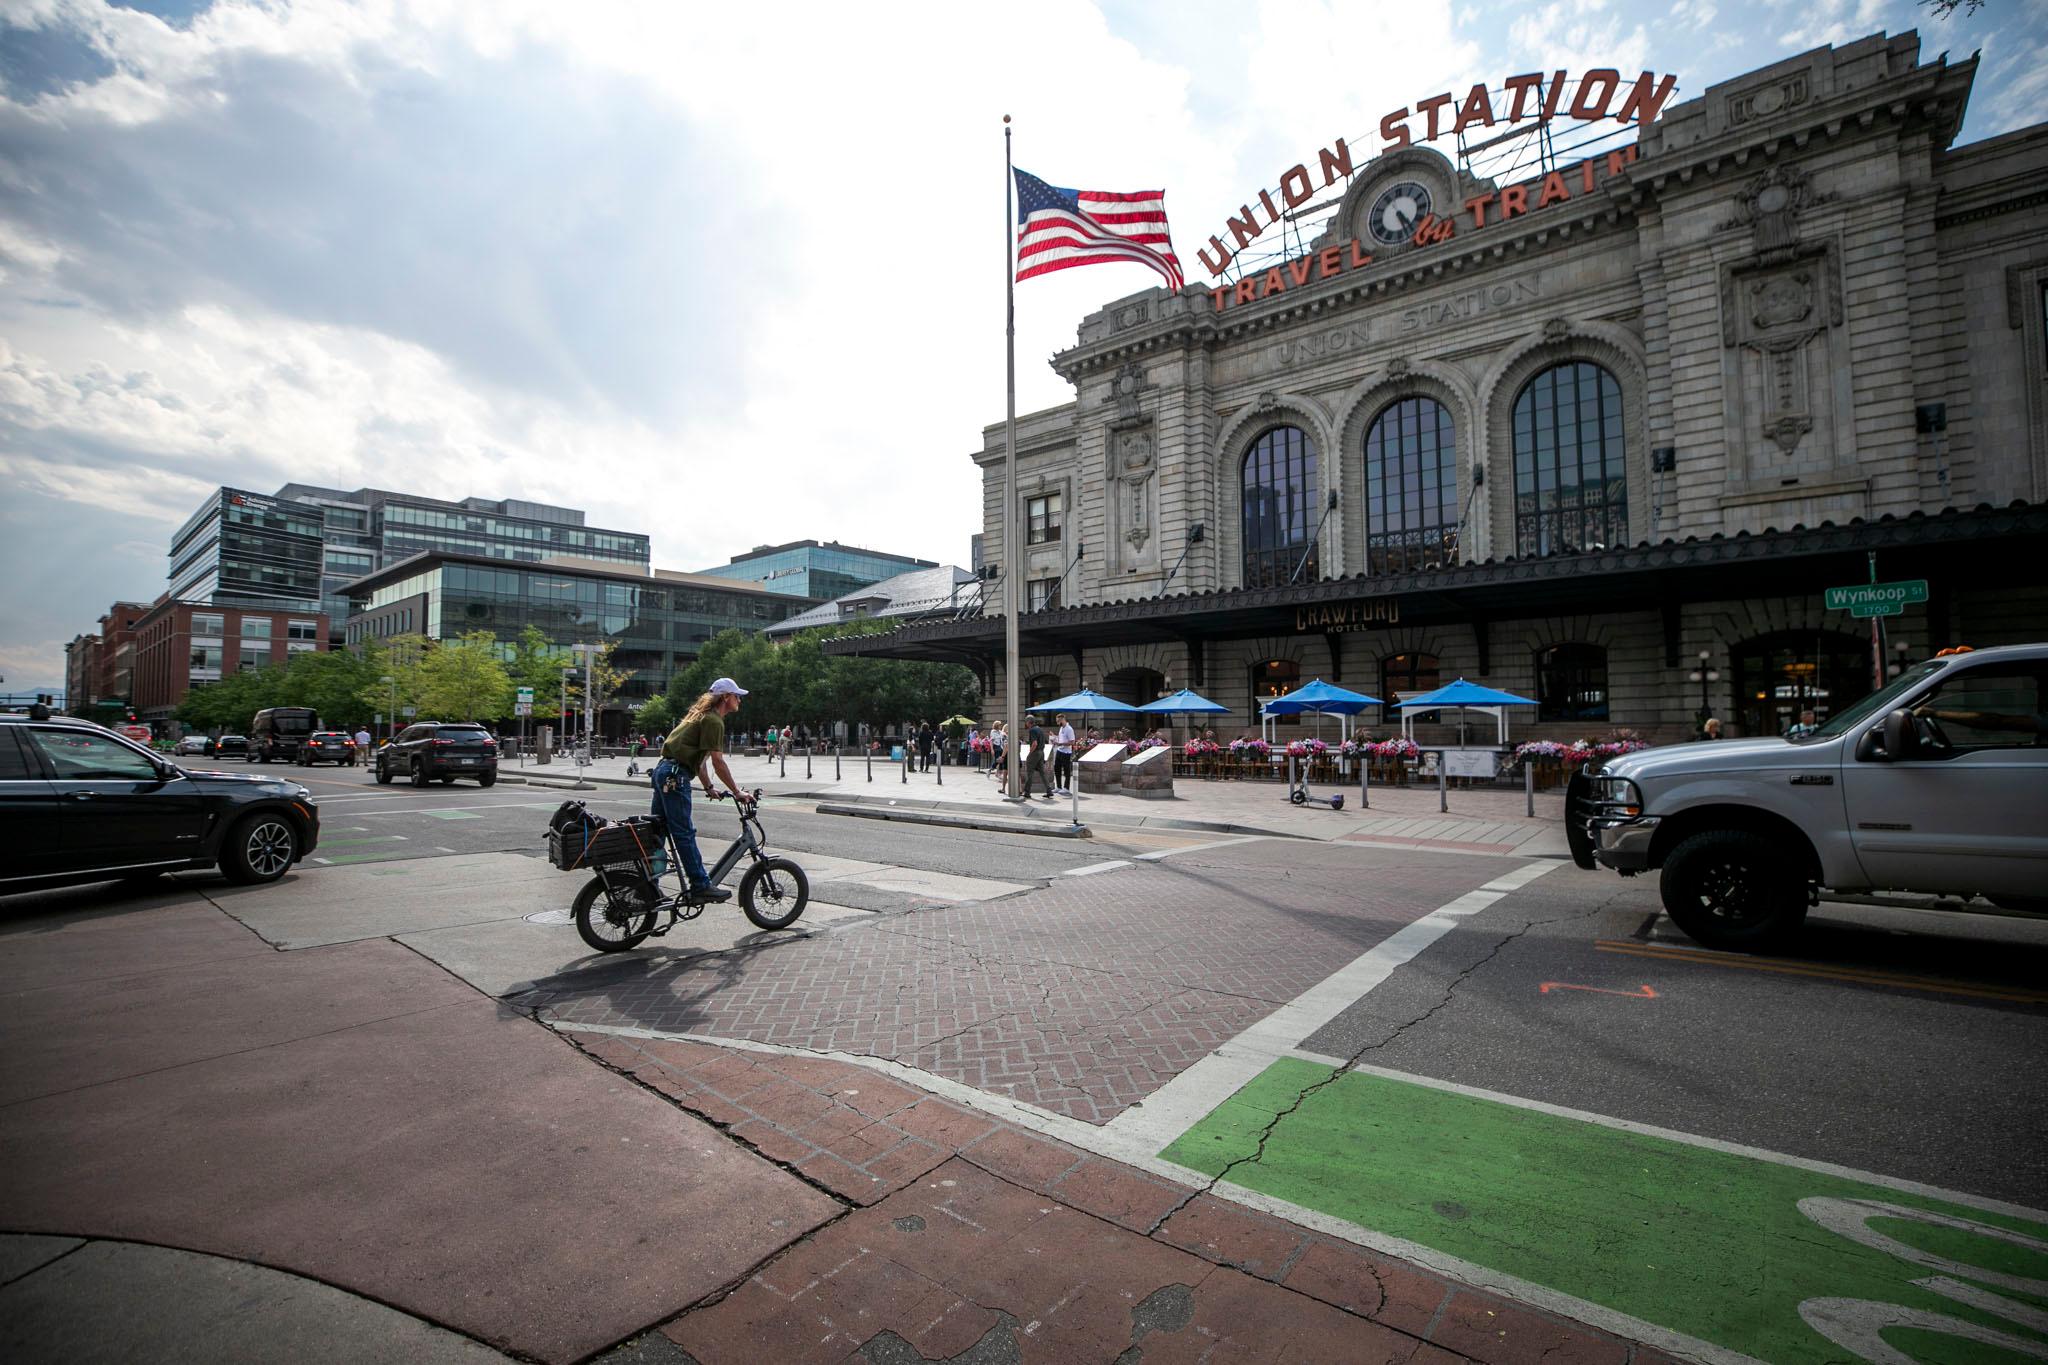 A cyclist crosses a street below Union Station; cars and trucks lurk in the intersection.